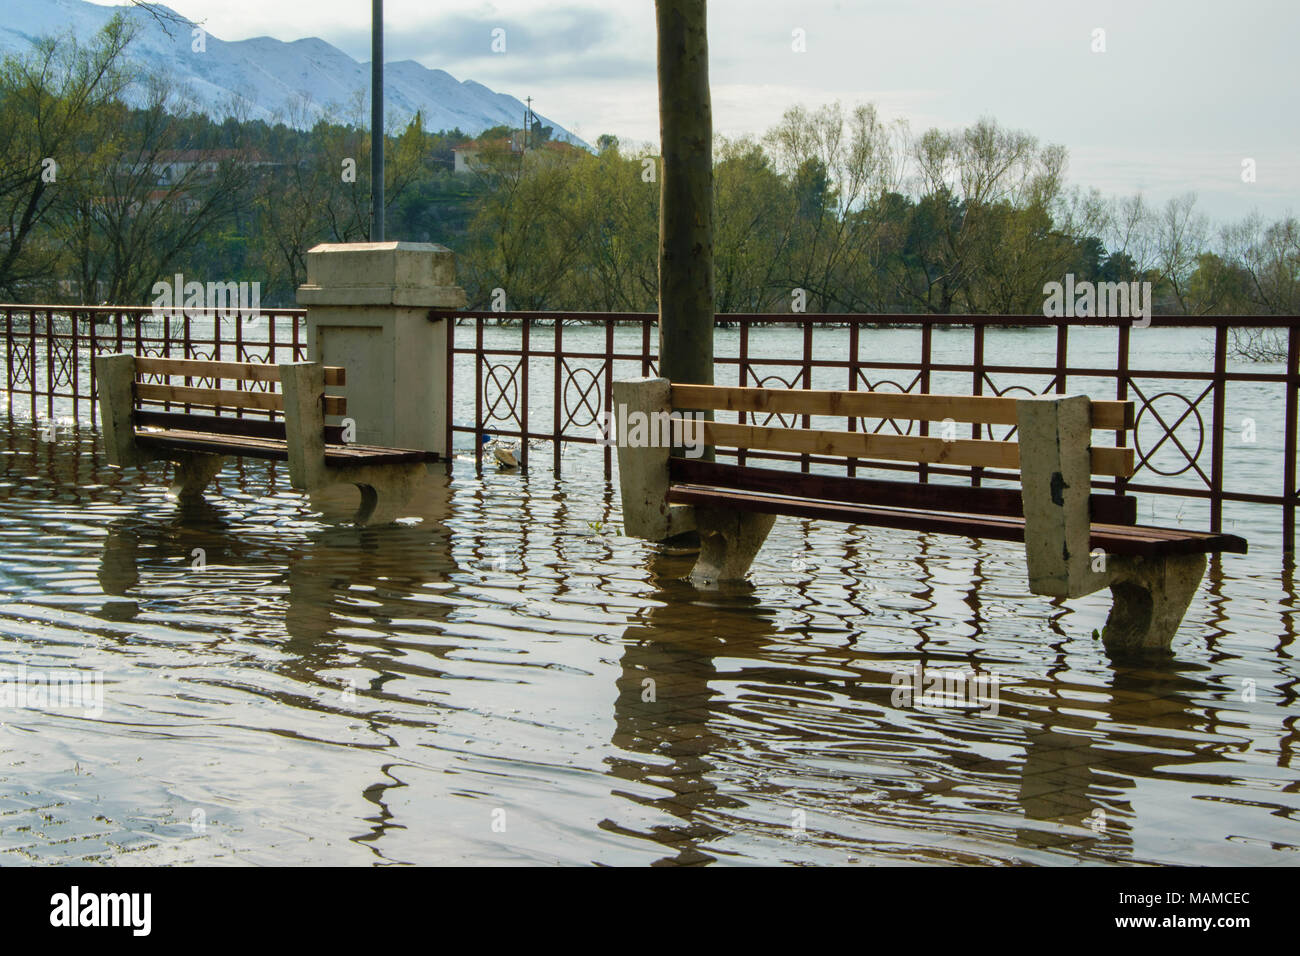 Raised water level from the river arrives on the sidewalk, concept - bad weather conditions Stock Photo